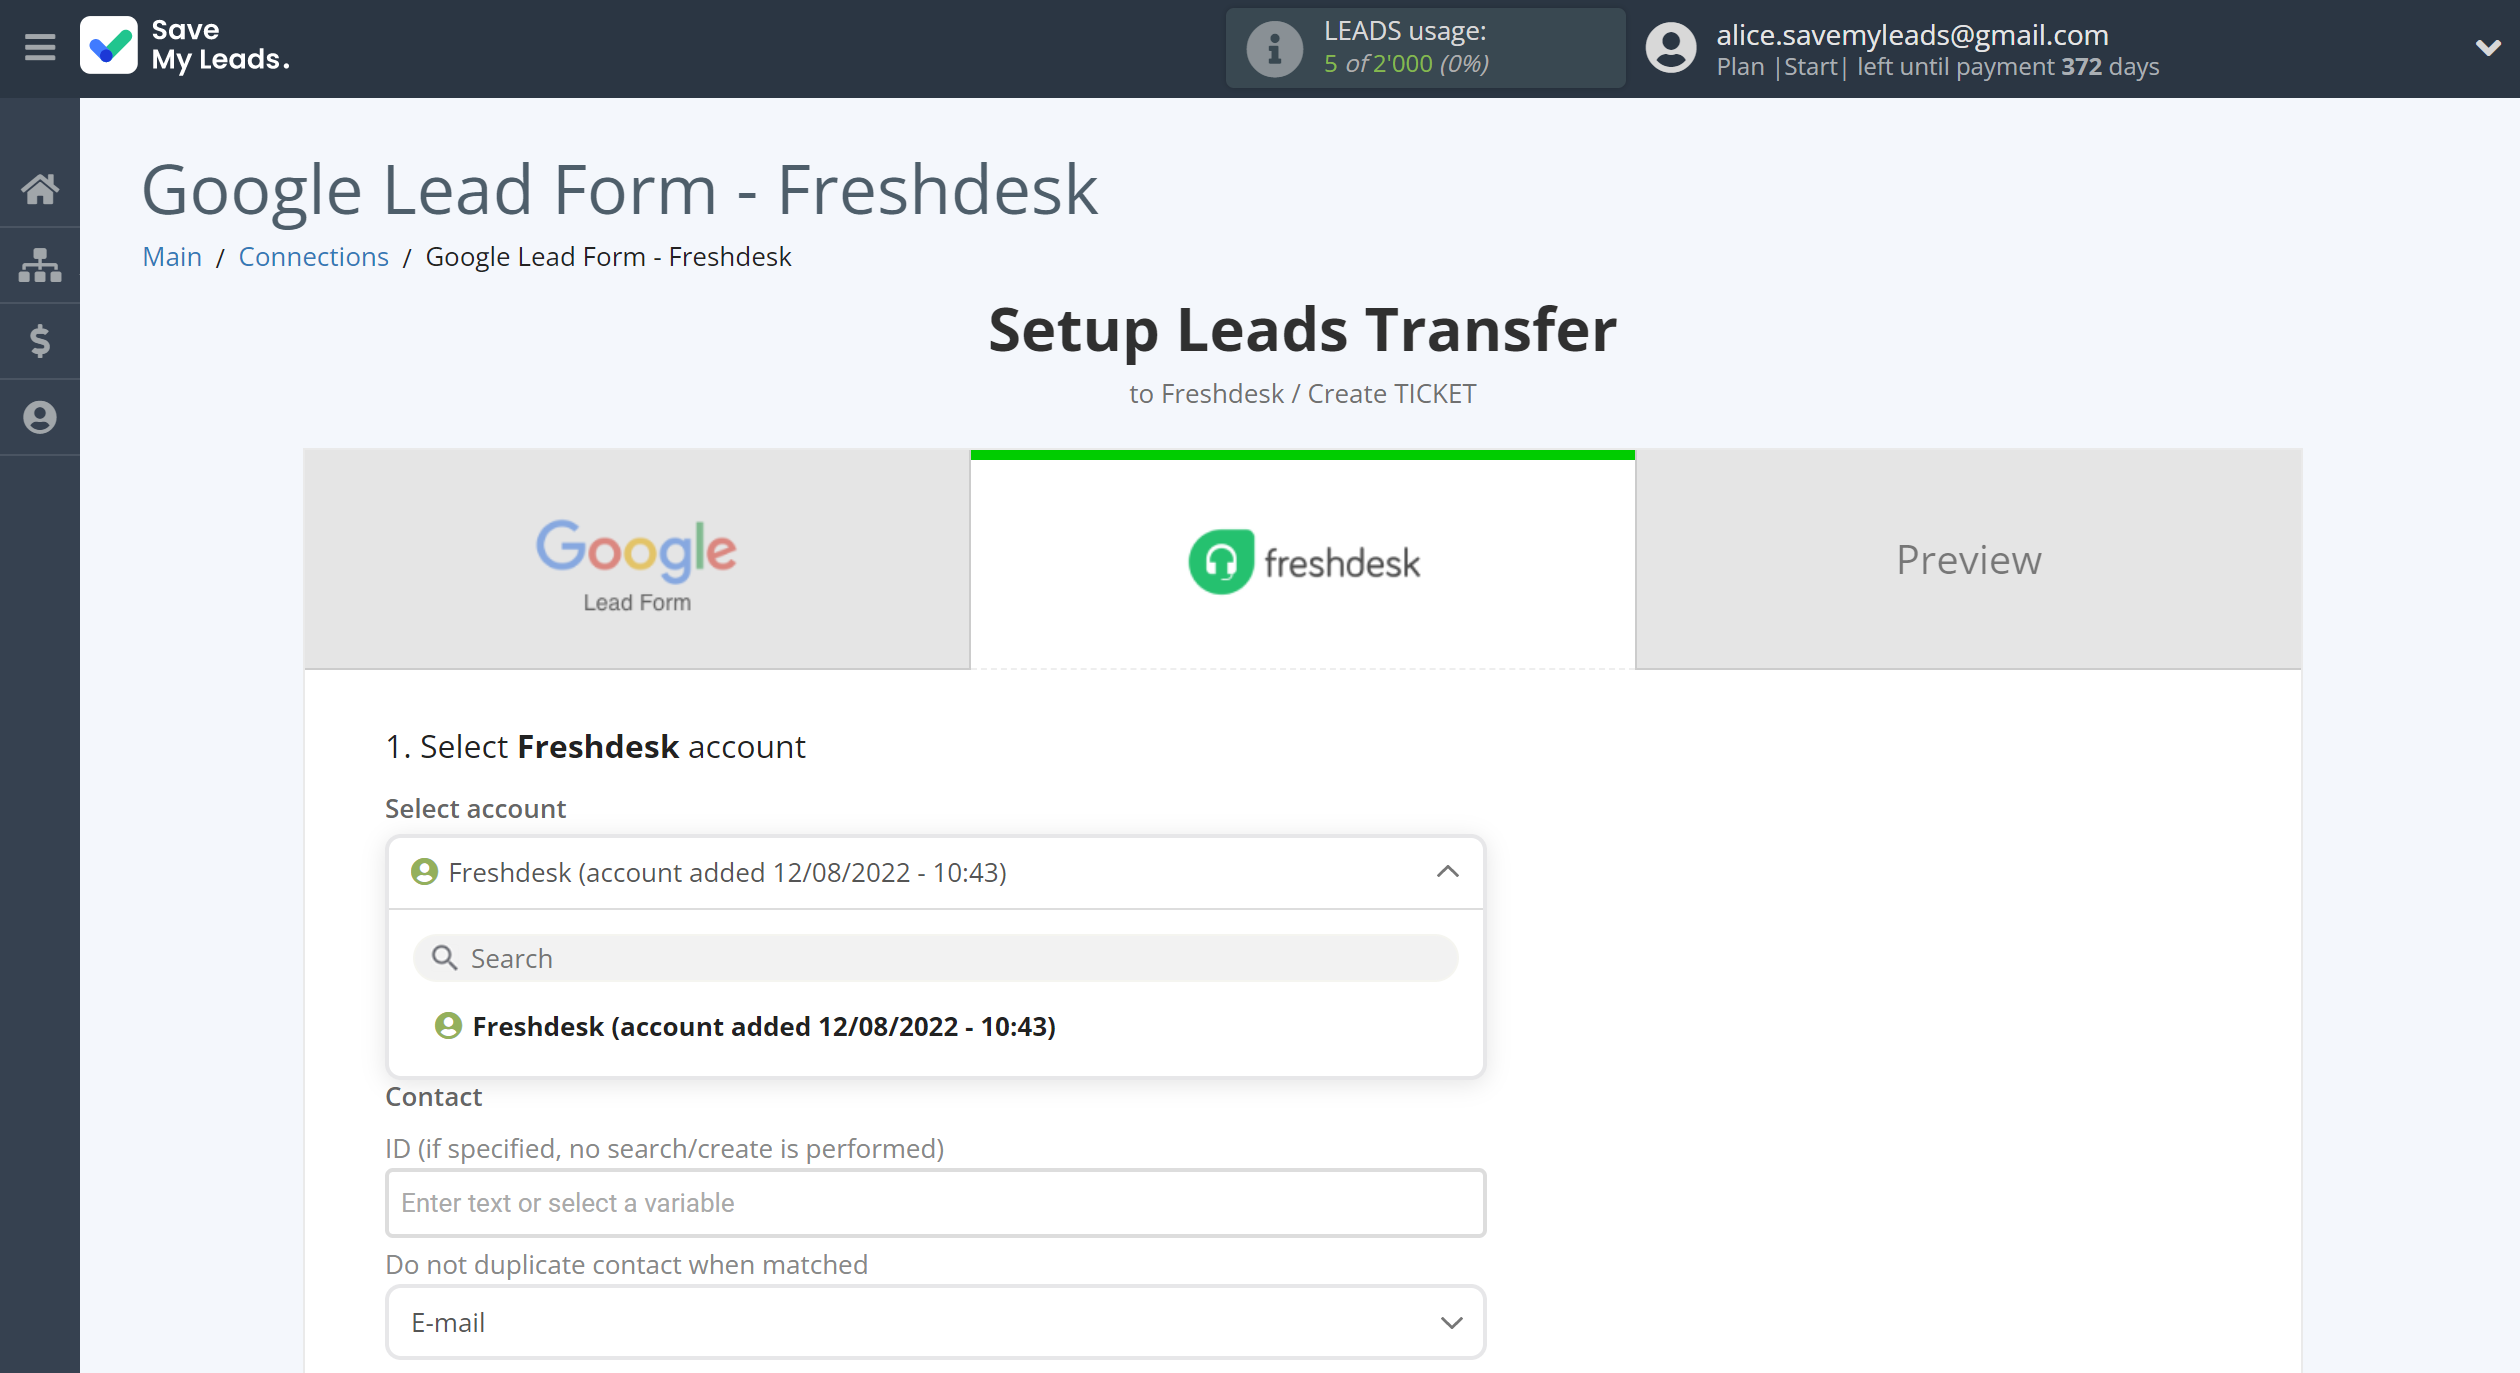 How to Connect Google Lead Form with Freshdesk Create Ticket | Data Destination account selection